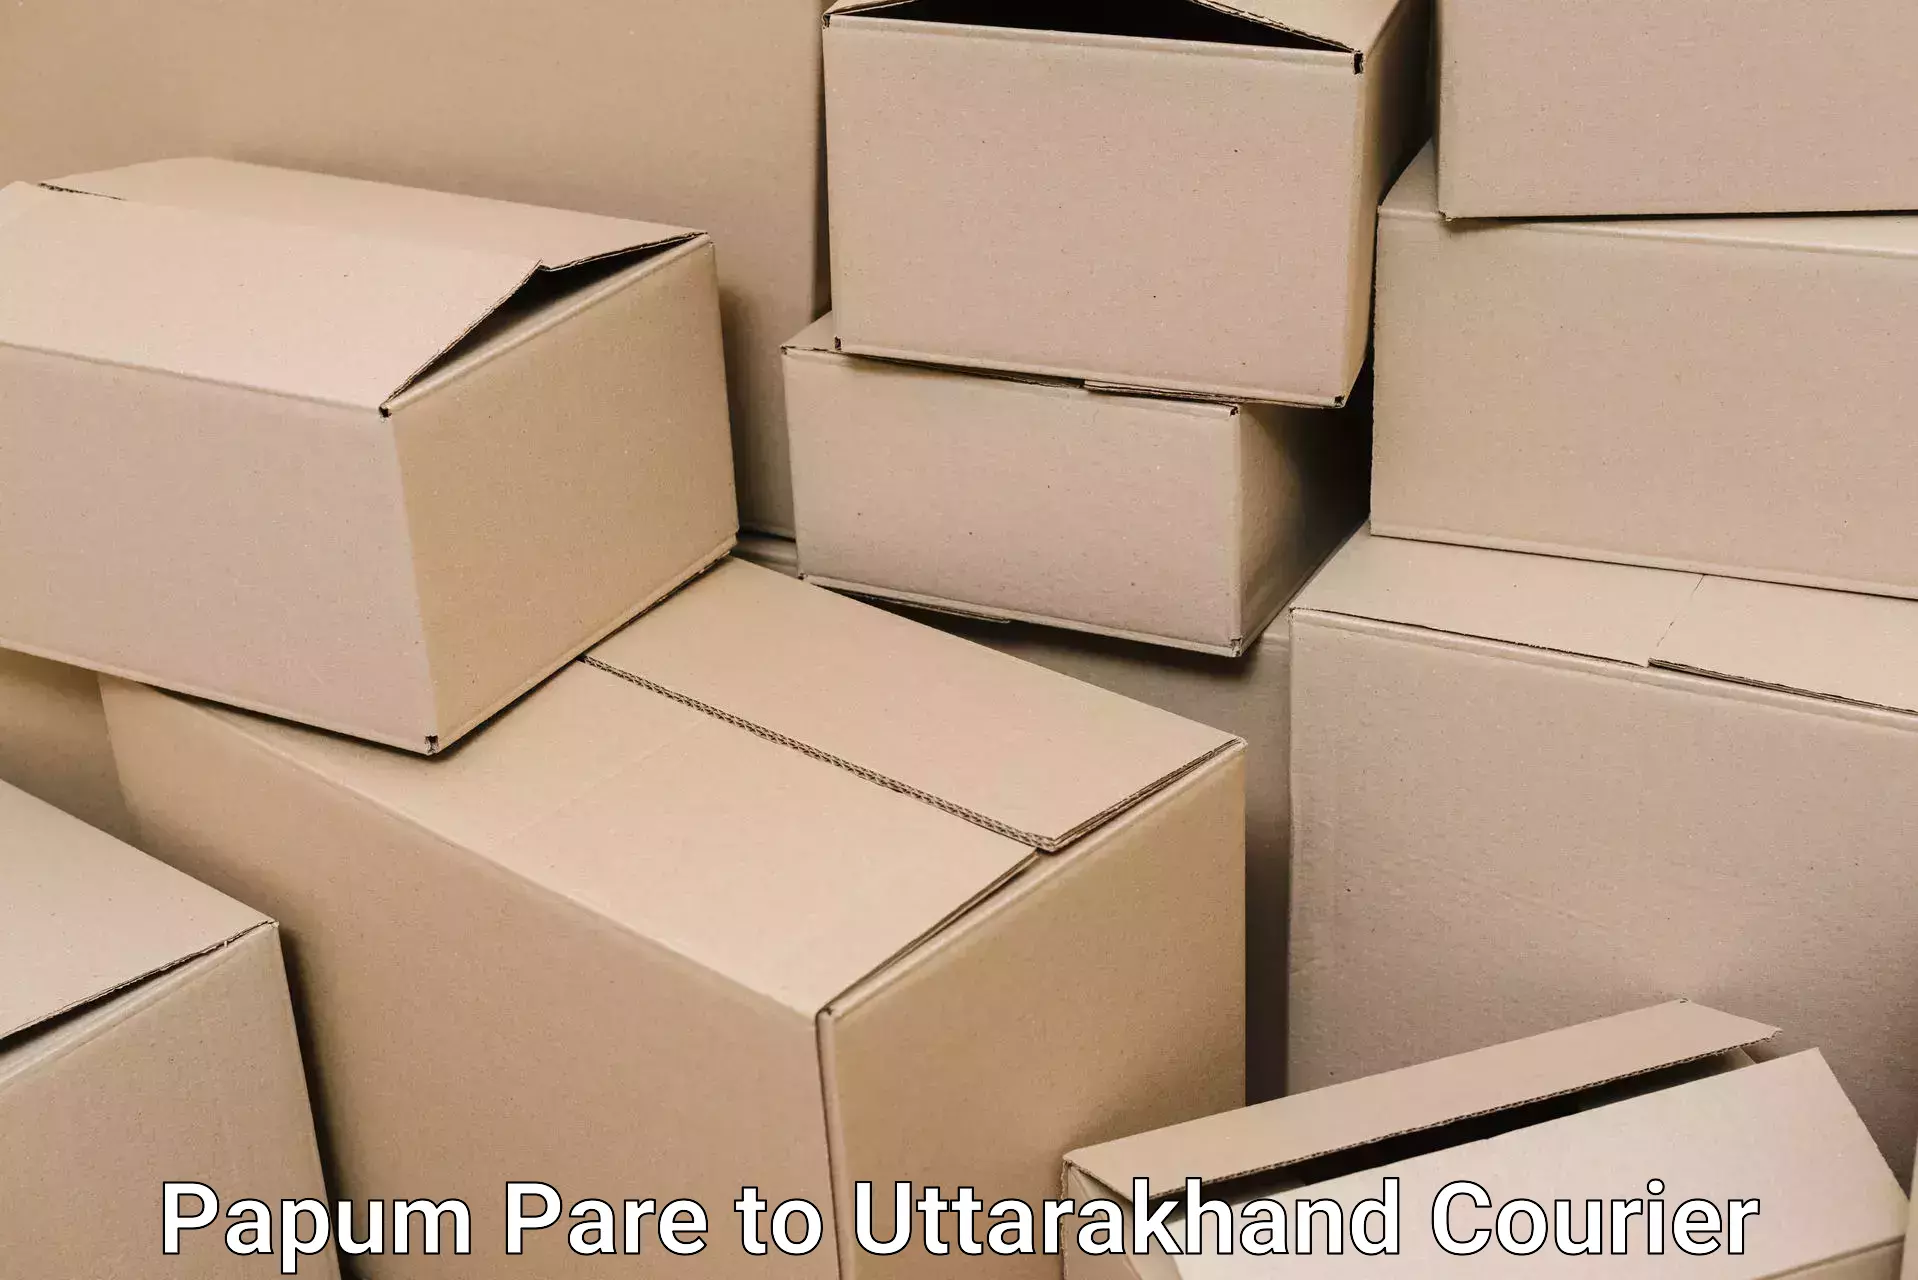 Trusted furniture movers Papum Pare to Uttarakhand